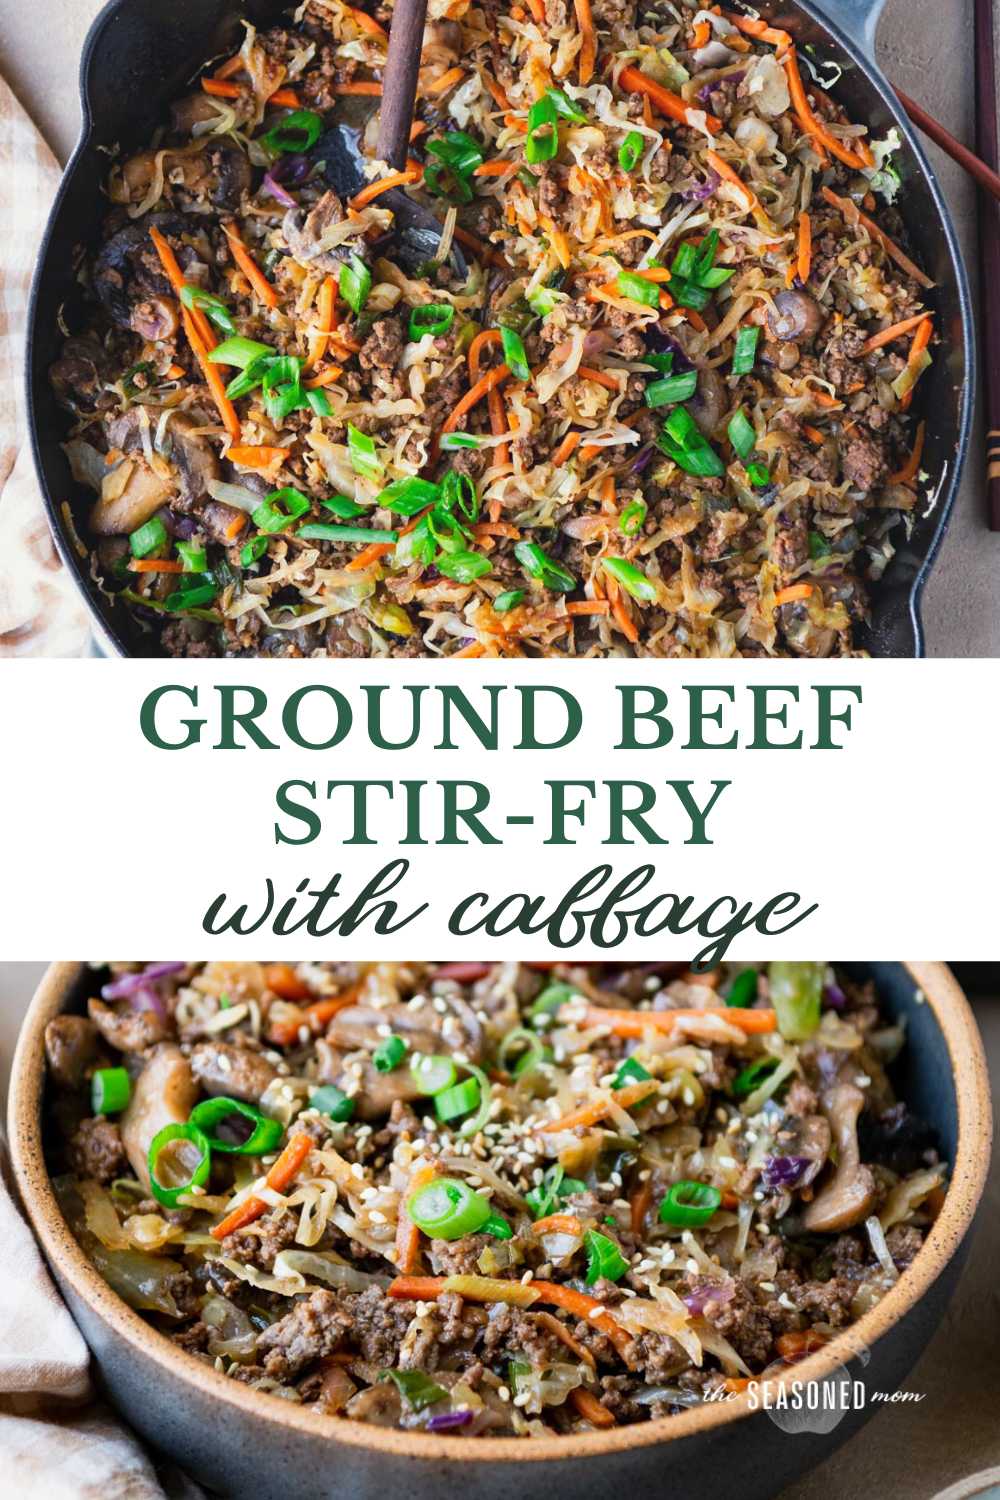 Ground Beef Stir Fry with Cabbage - The Seasoned Mom